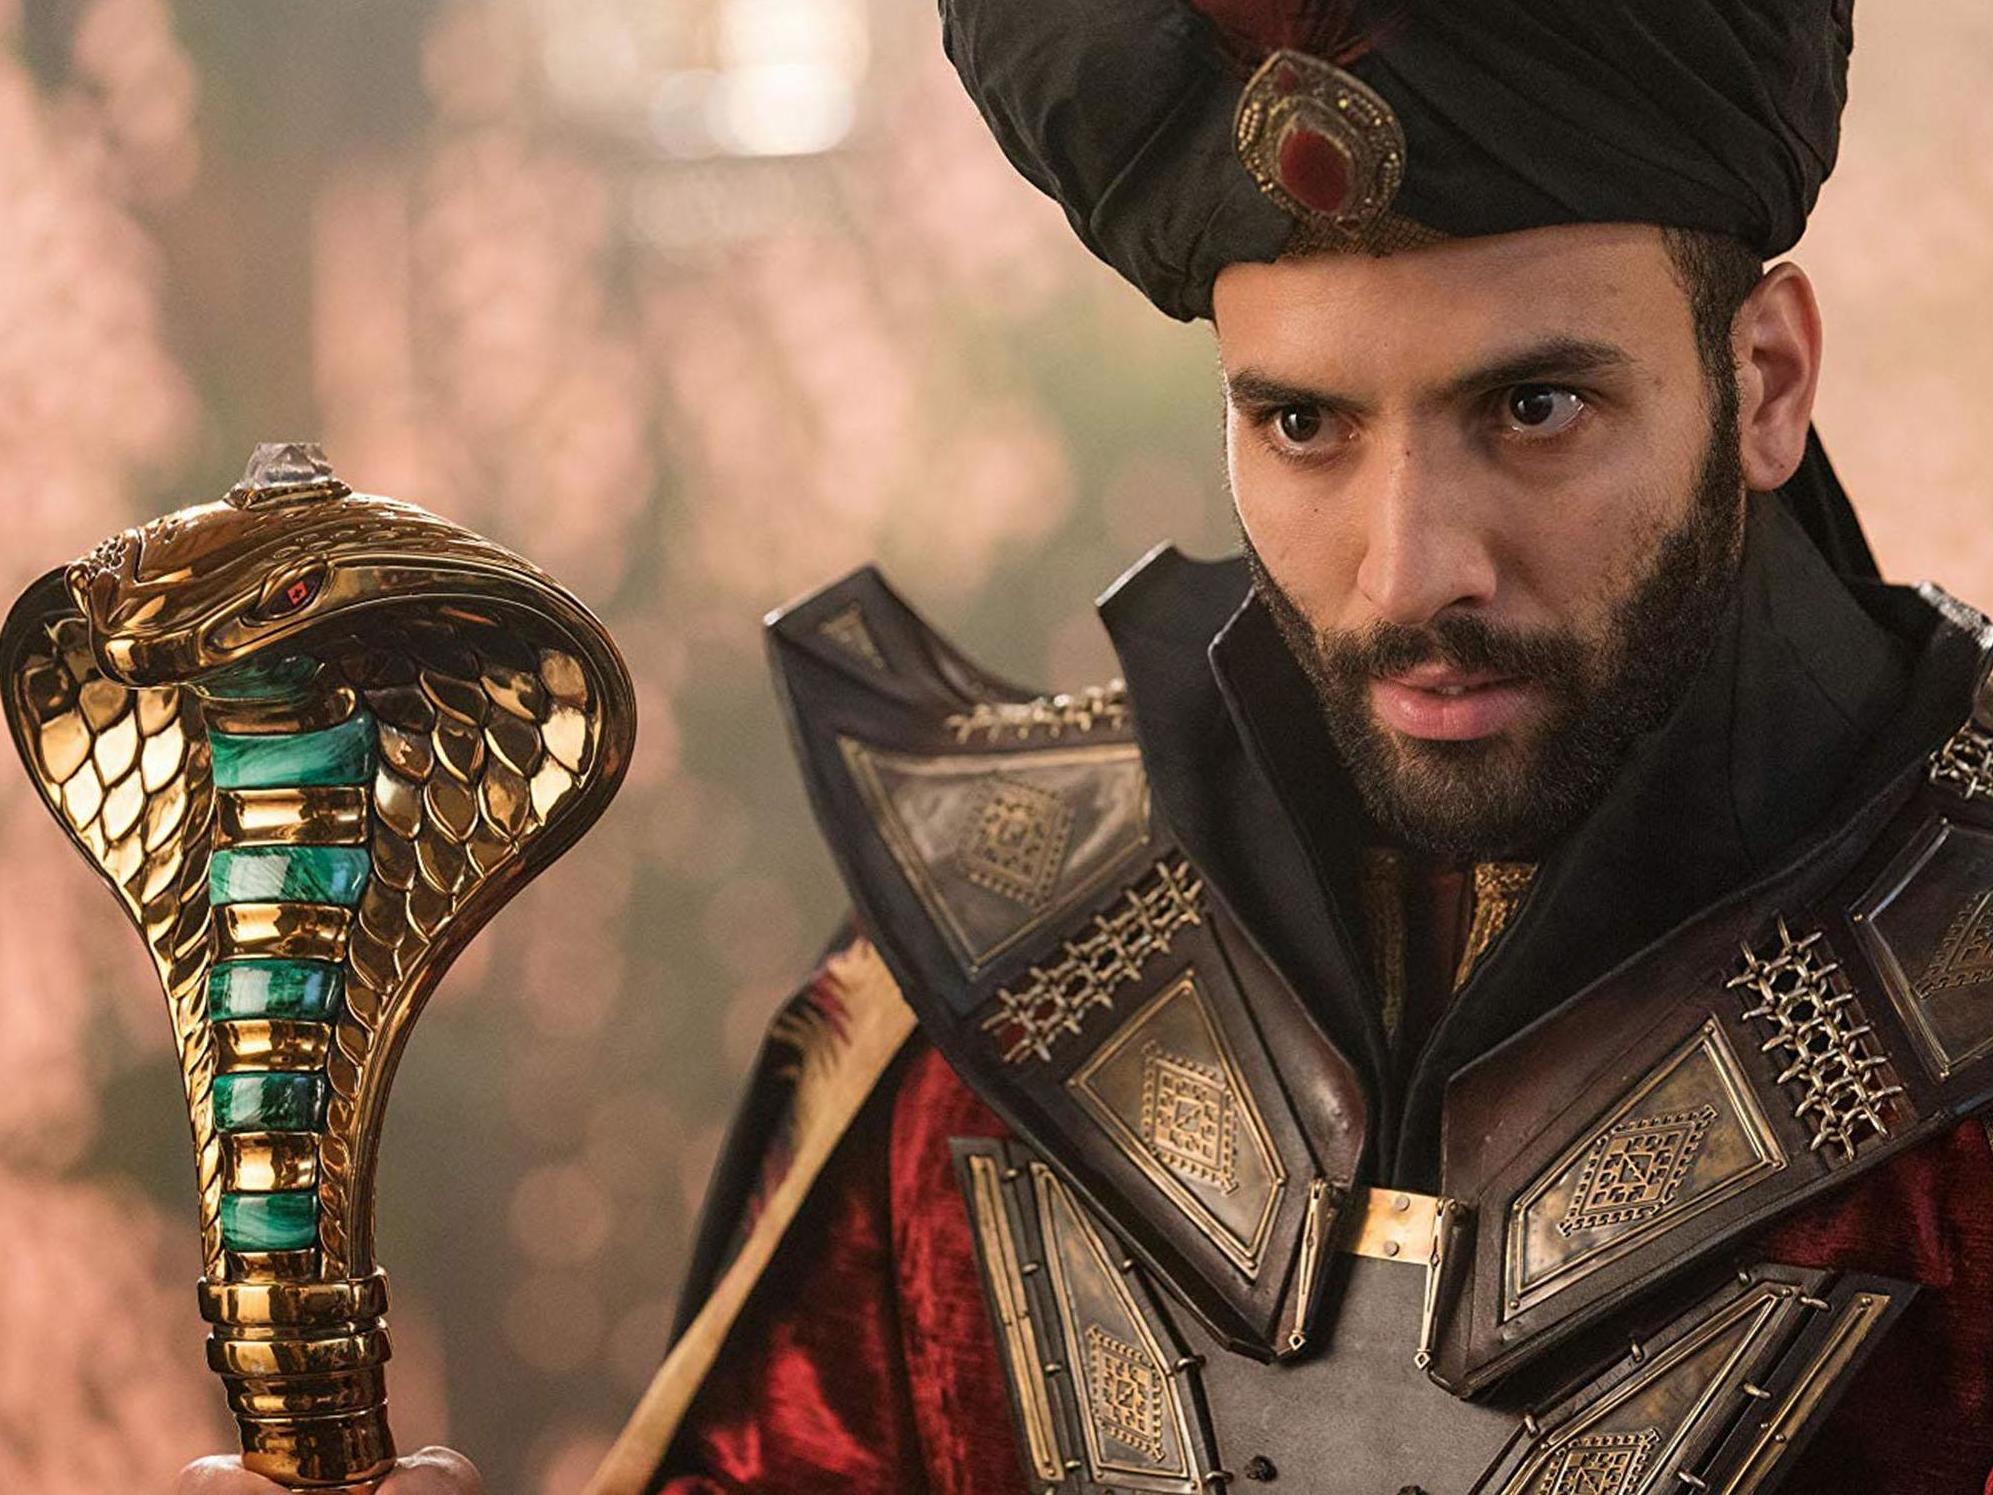 The new live-action Aladdin seeks to break Hollywood stereotypes, with mixed results